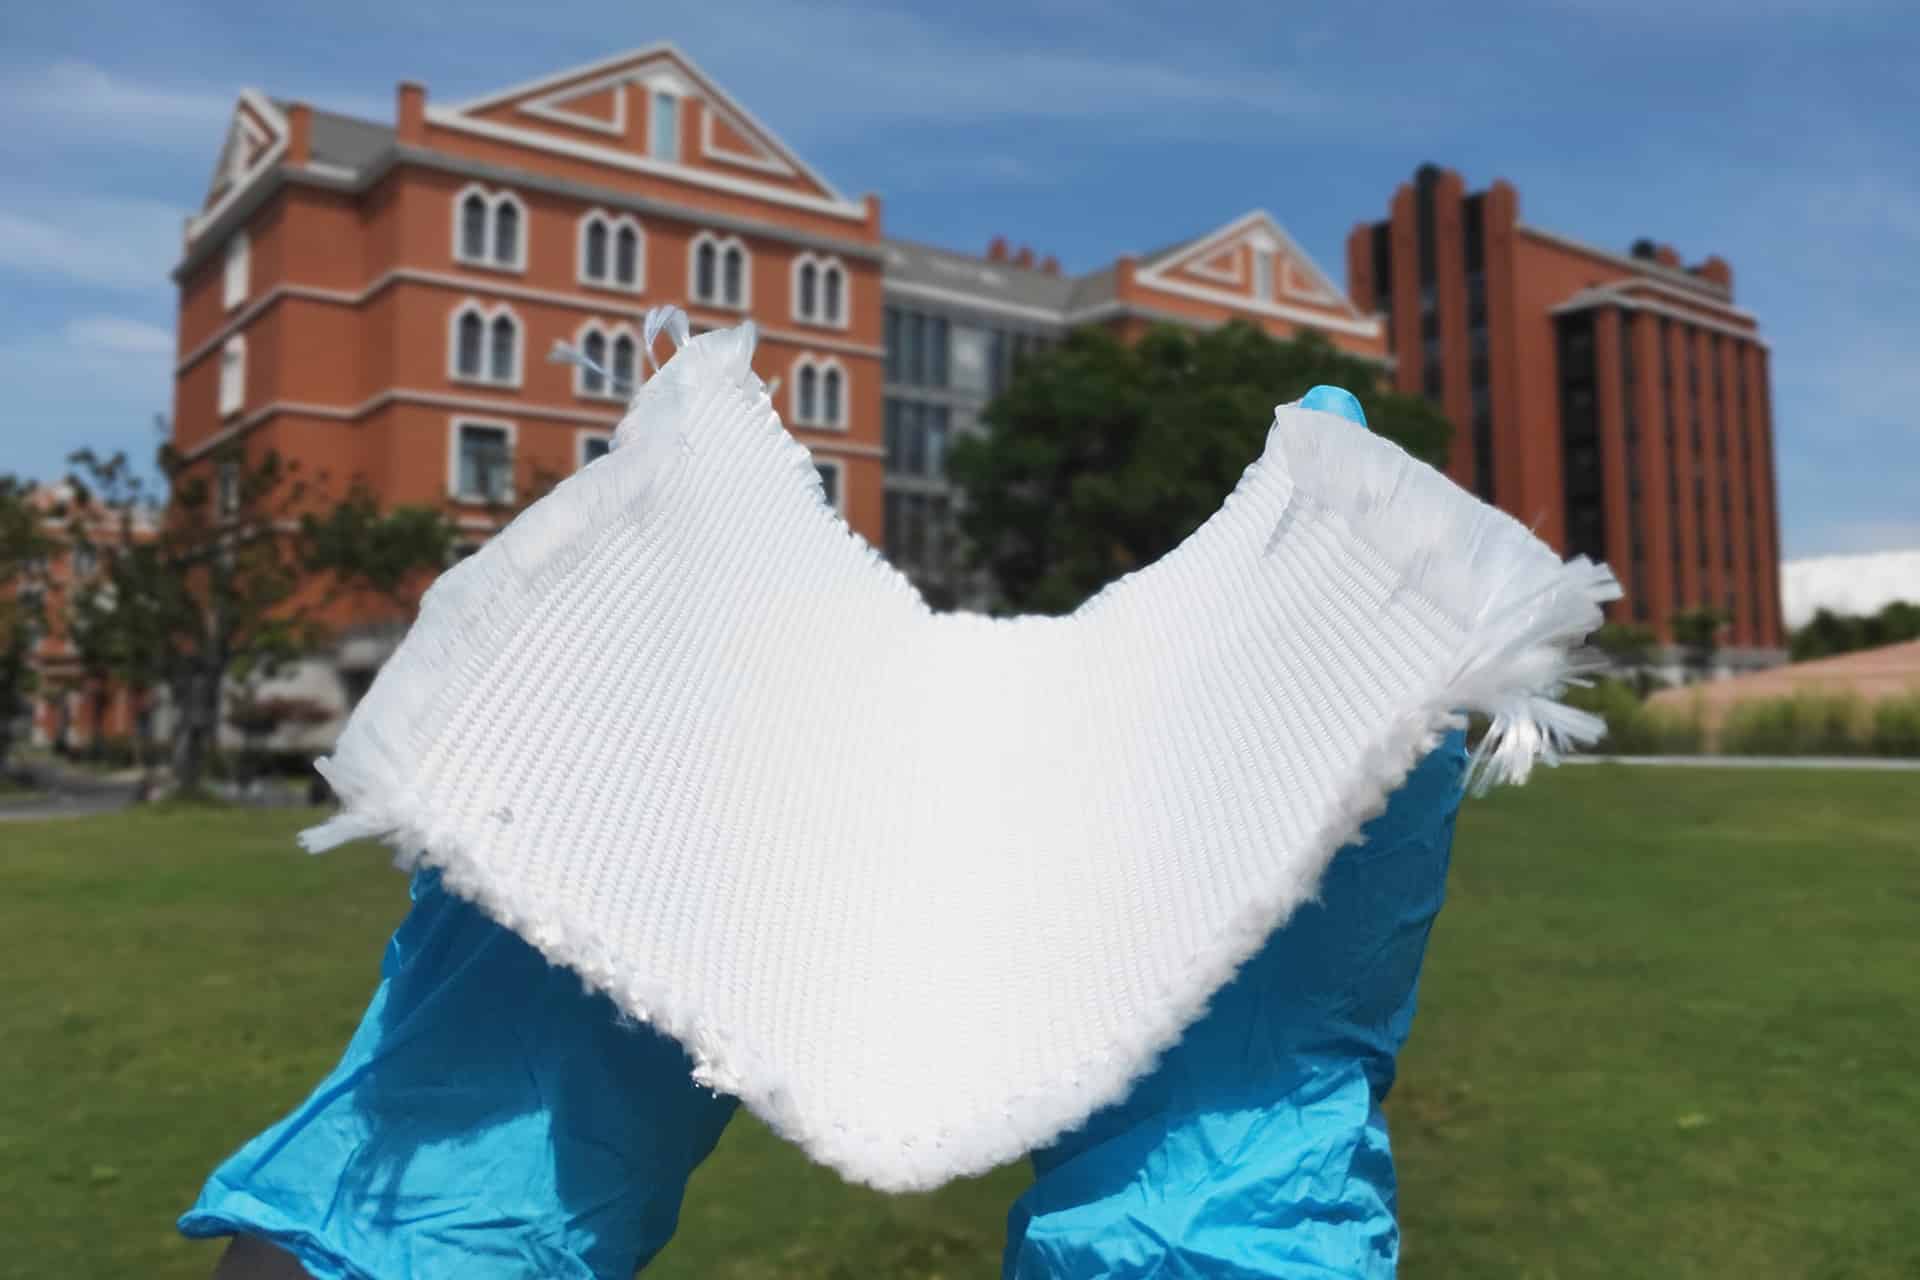 A researcher holding the thermal cloak fabric in their hands.